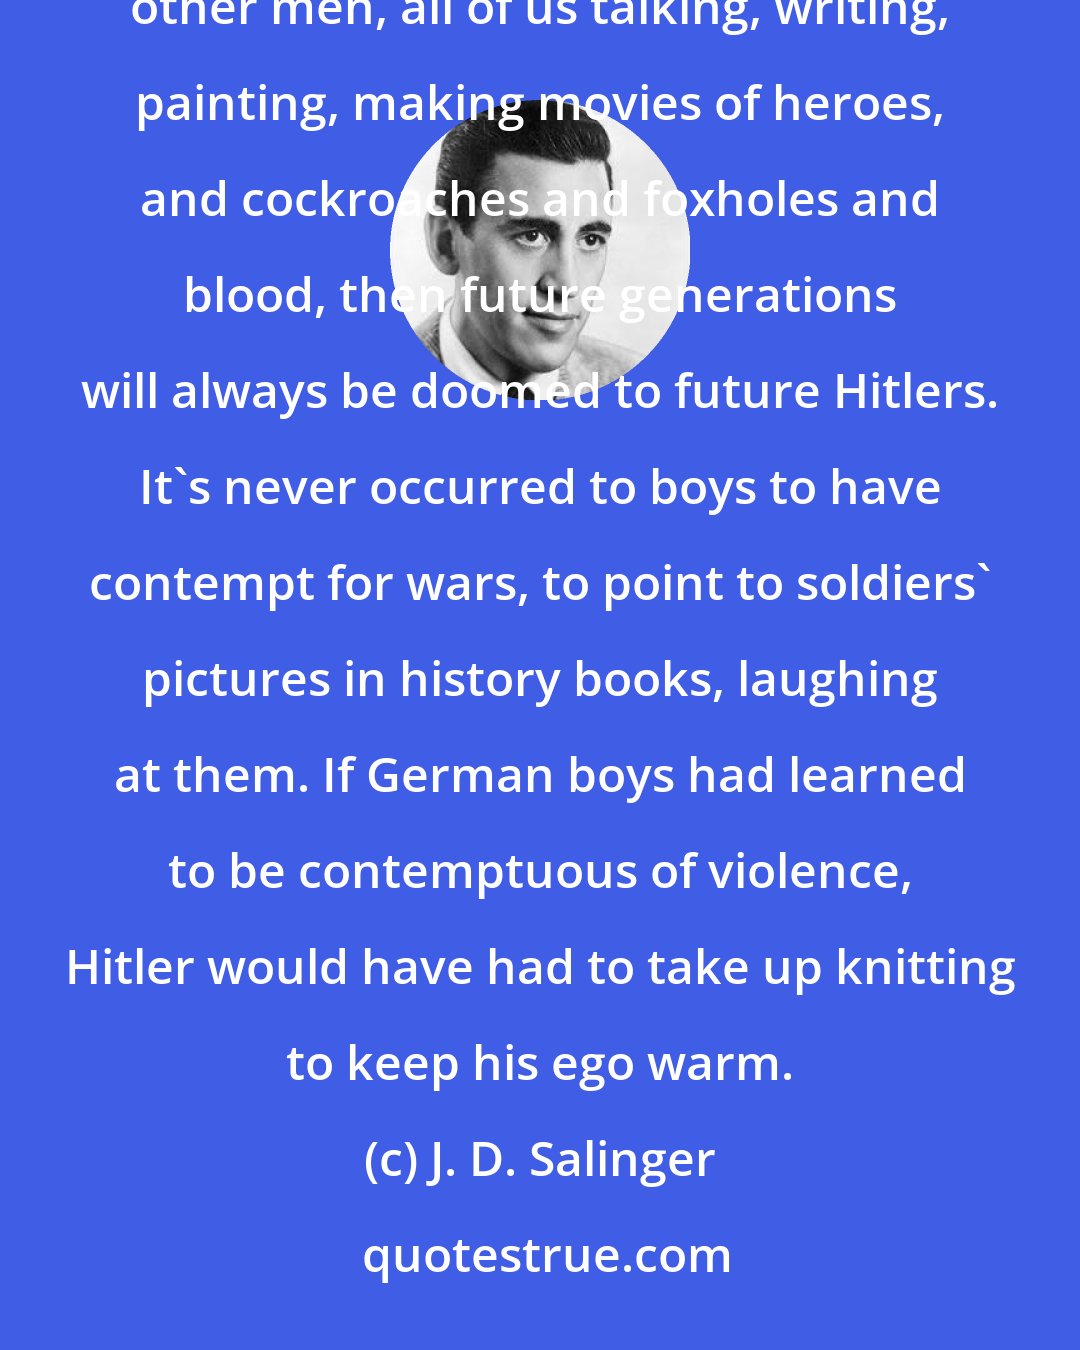 J. D. Salinger: But if we come back, if German men come back, if British men come back, and Japs, and French, and all the other men, all of us talking, writing, painting, making movies of heroes, and cockroaches and foxholes and blood, then future generations will always be doomed to future Hitlers. It's never occurred to boys to have contempt for wars, to point to soldiers' pictures in history books, laughing at them. If German boys had learned to be contemptuous of violence, Hitler would have had to take up knitting to keep his ego warm.